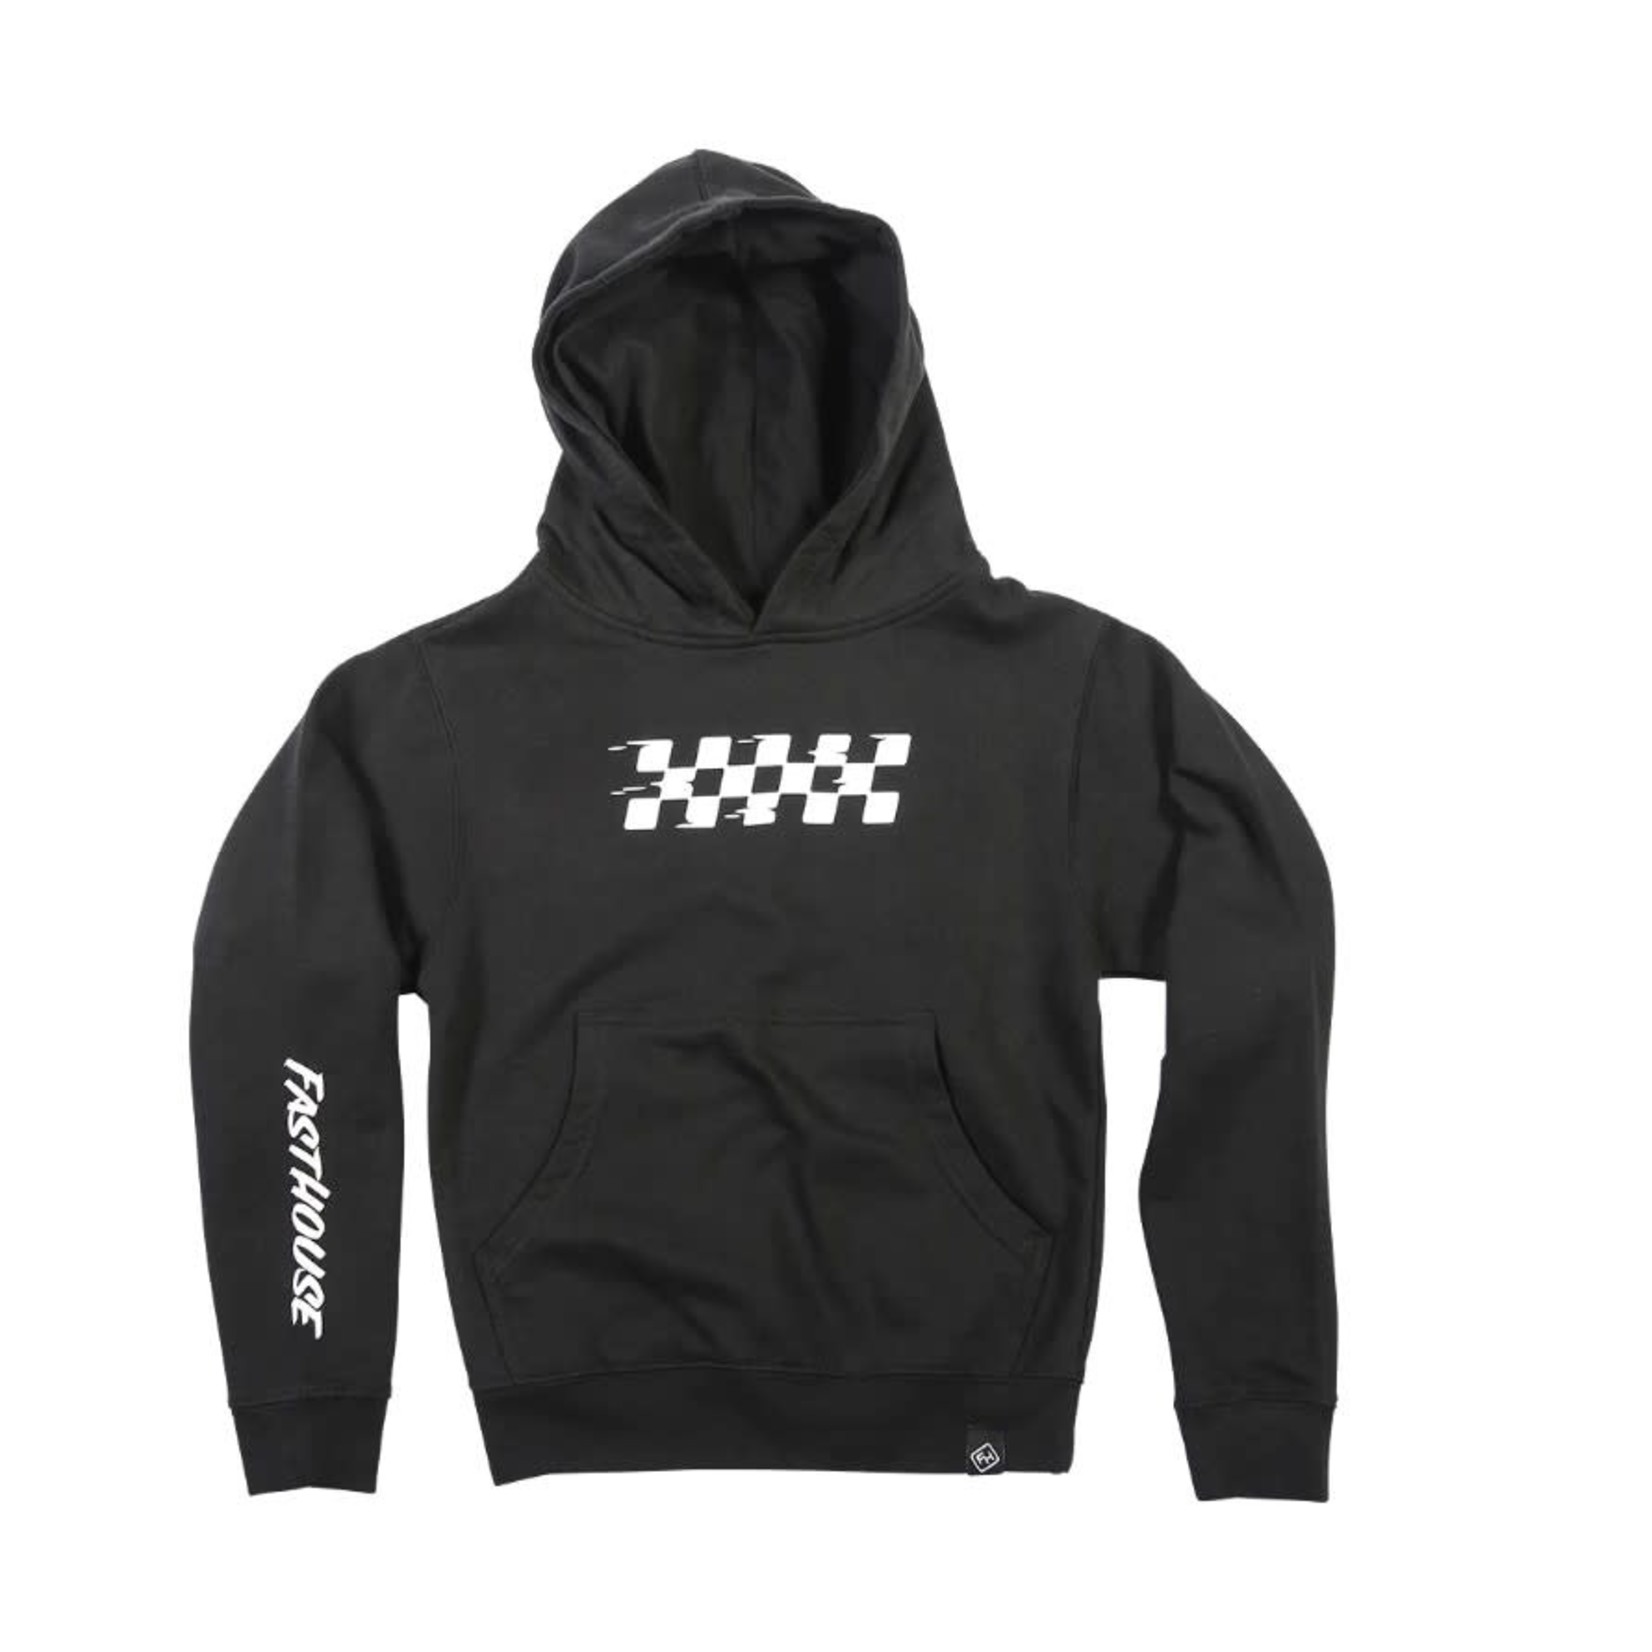 FASTHOUSE YOUTH VORTEX HOODIE, BLACK